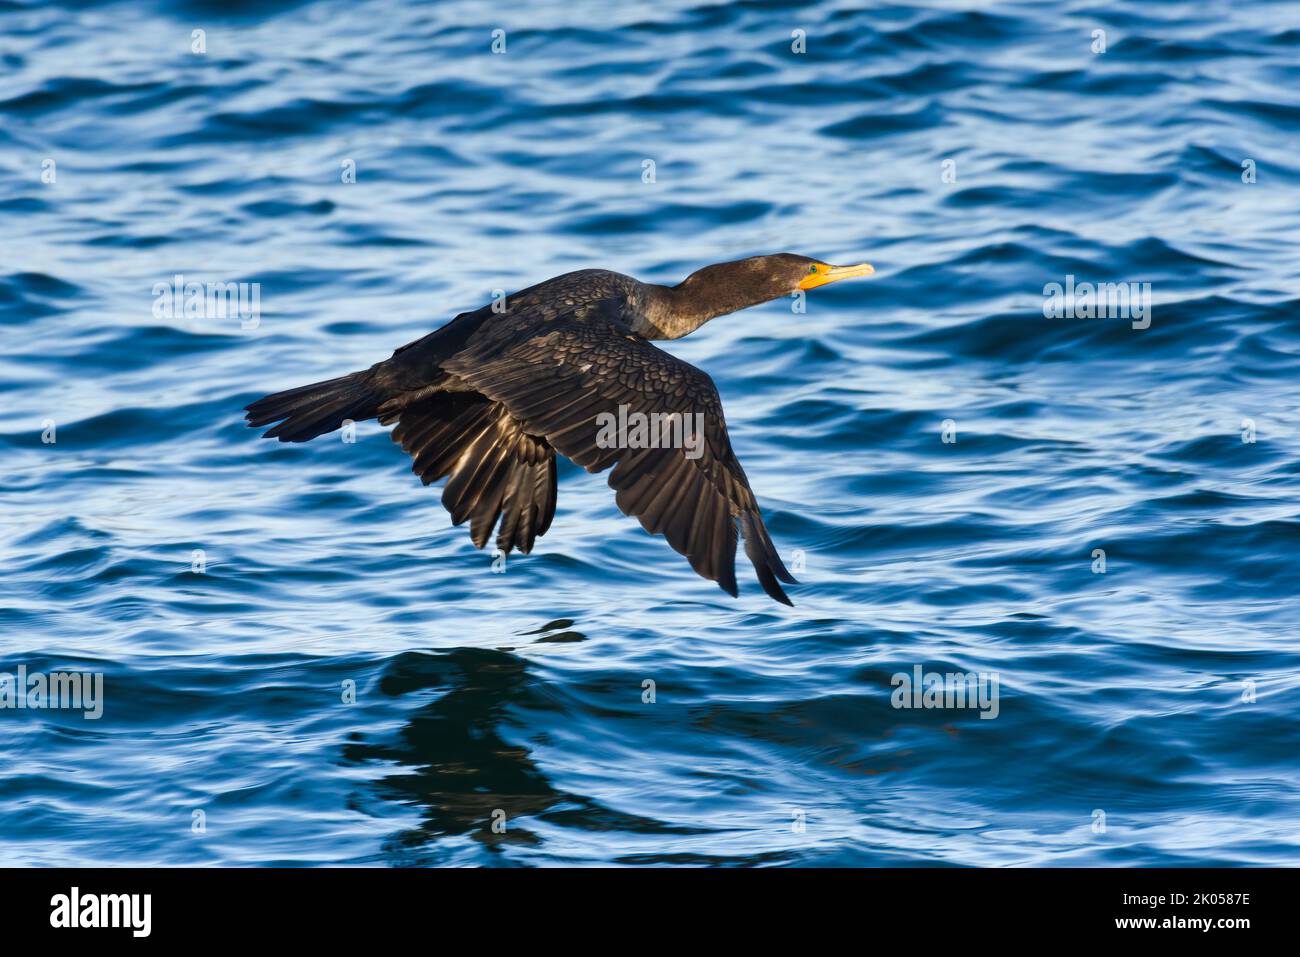 Cormorant flying low with wings extended across waves on blue water Stock Photo